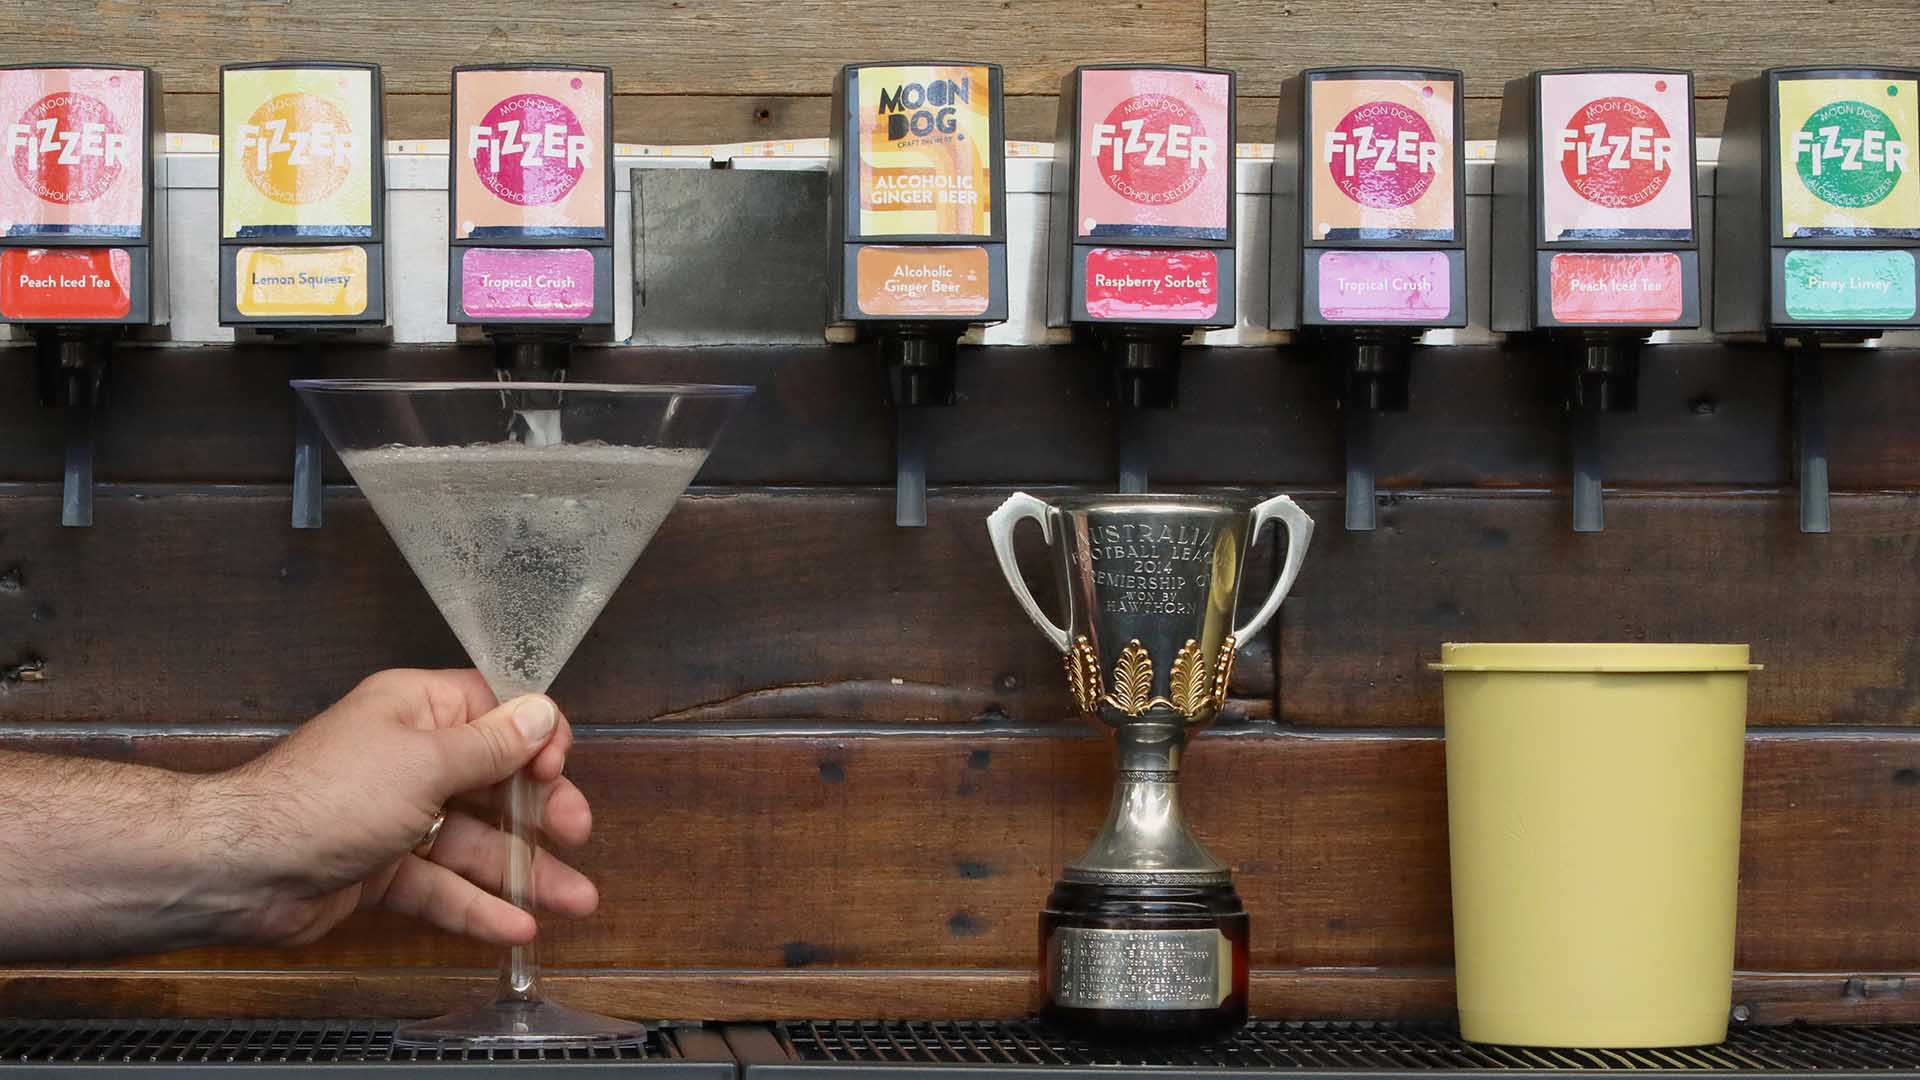 Moon Dog BYO Cup Day - Free Fizzer Seltzer